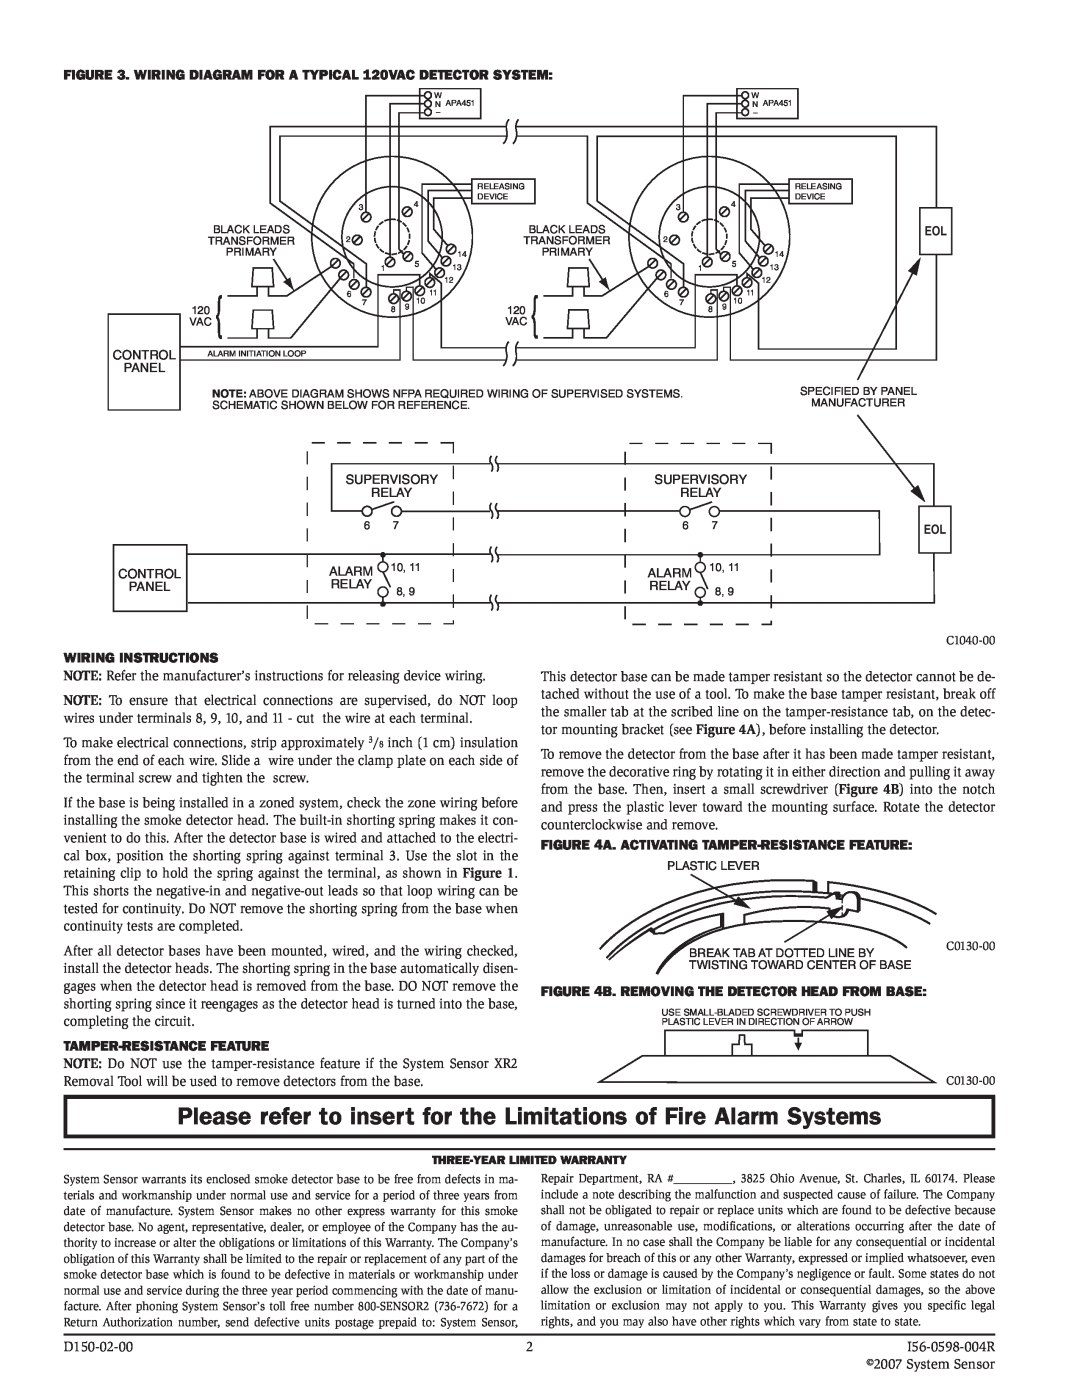 System Sensor B114LP specifications Wiring Instructions, Tamper-resistanceFeature, A. Activating tamper-resistancefeature 